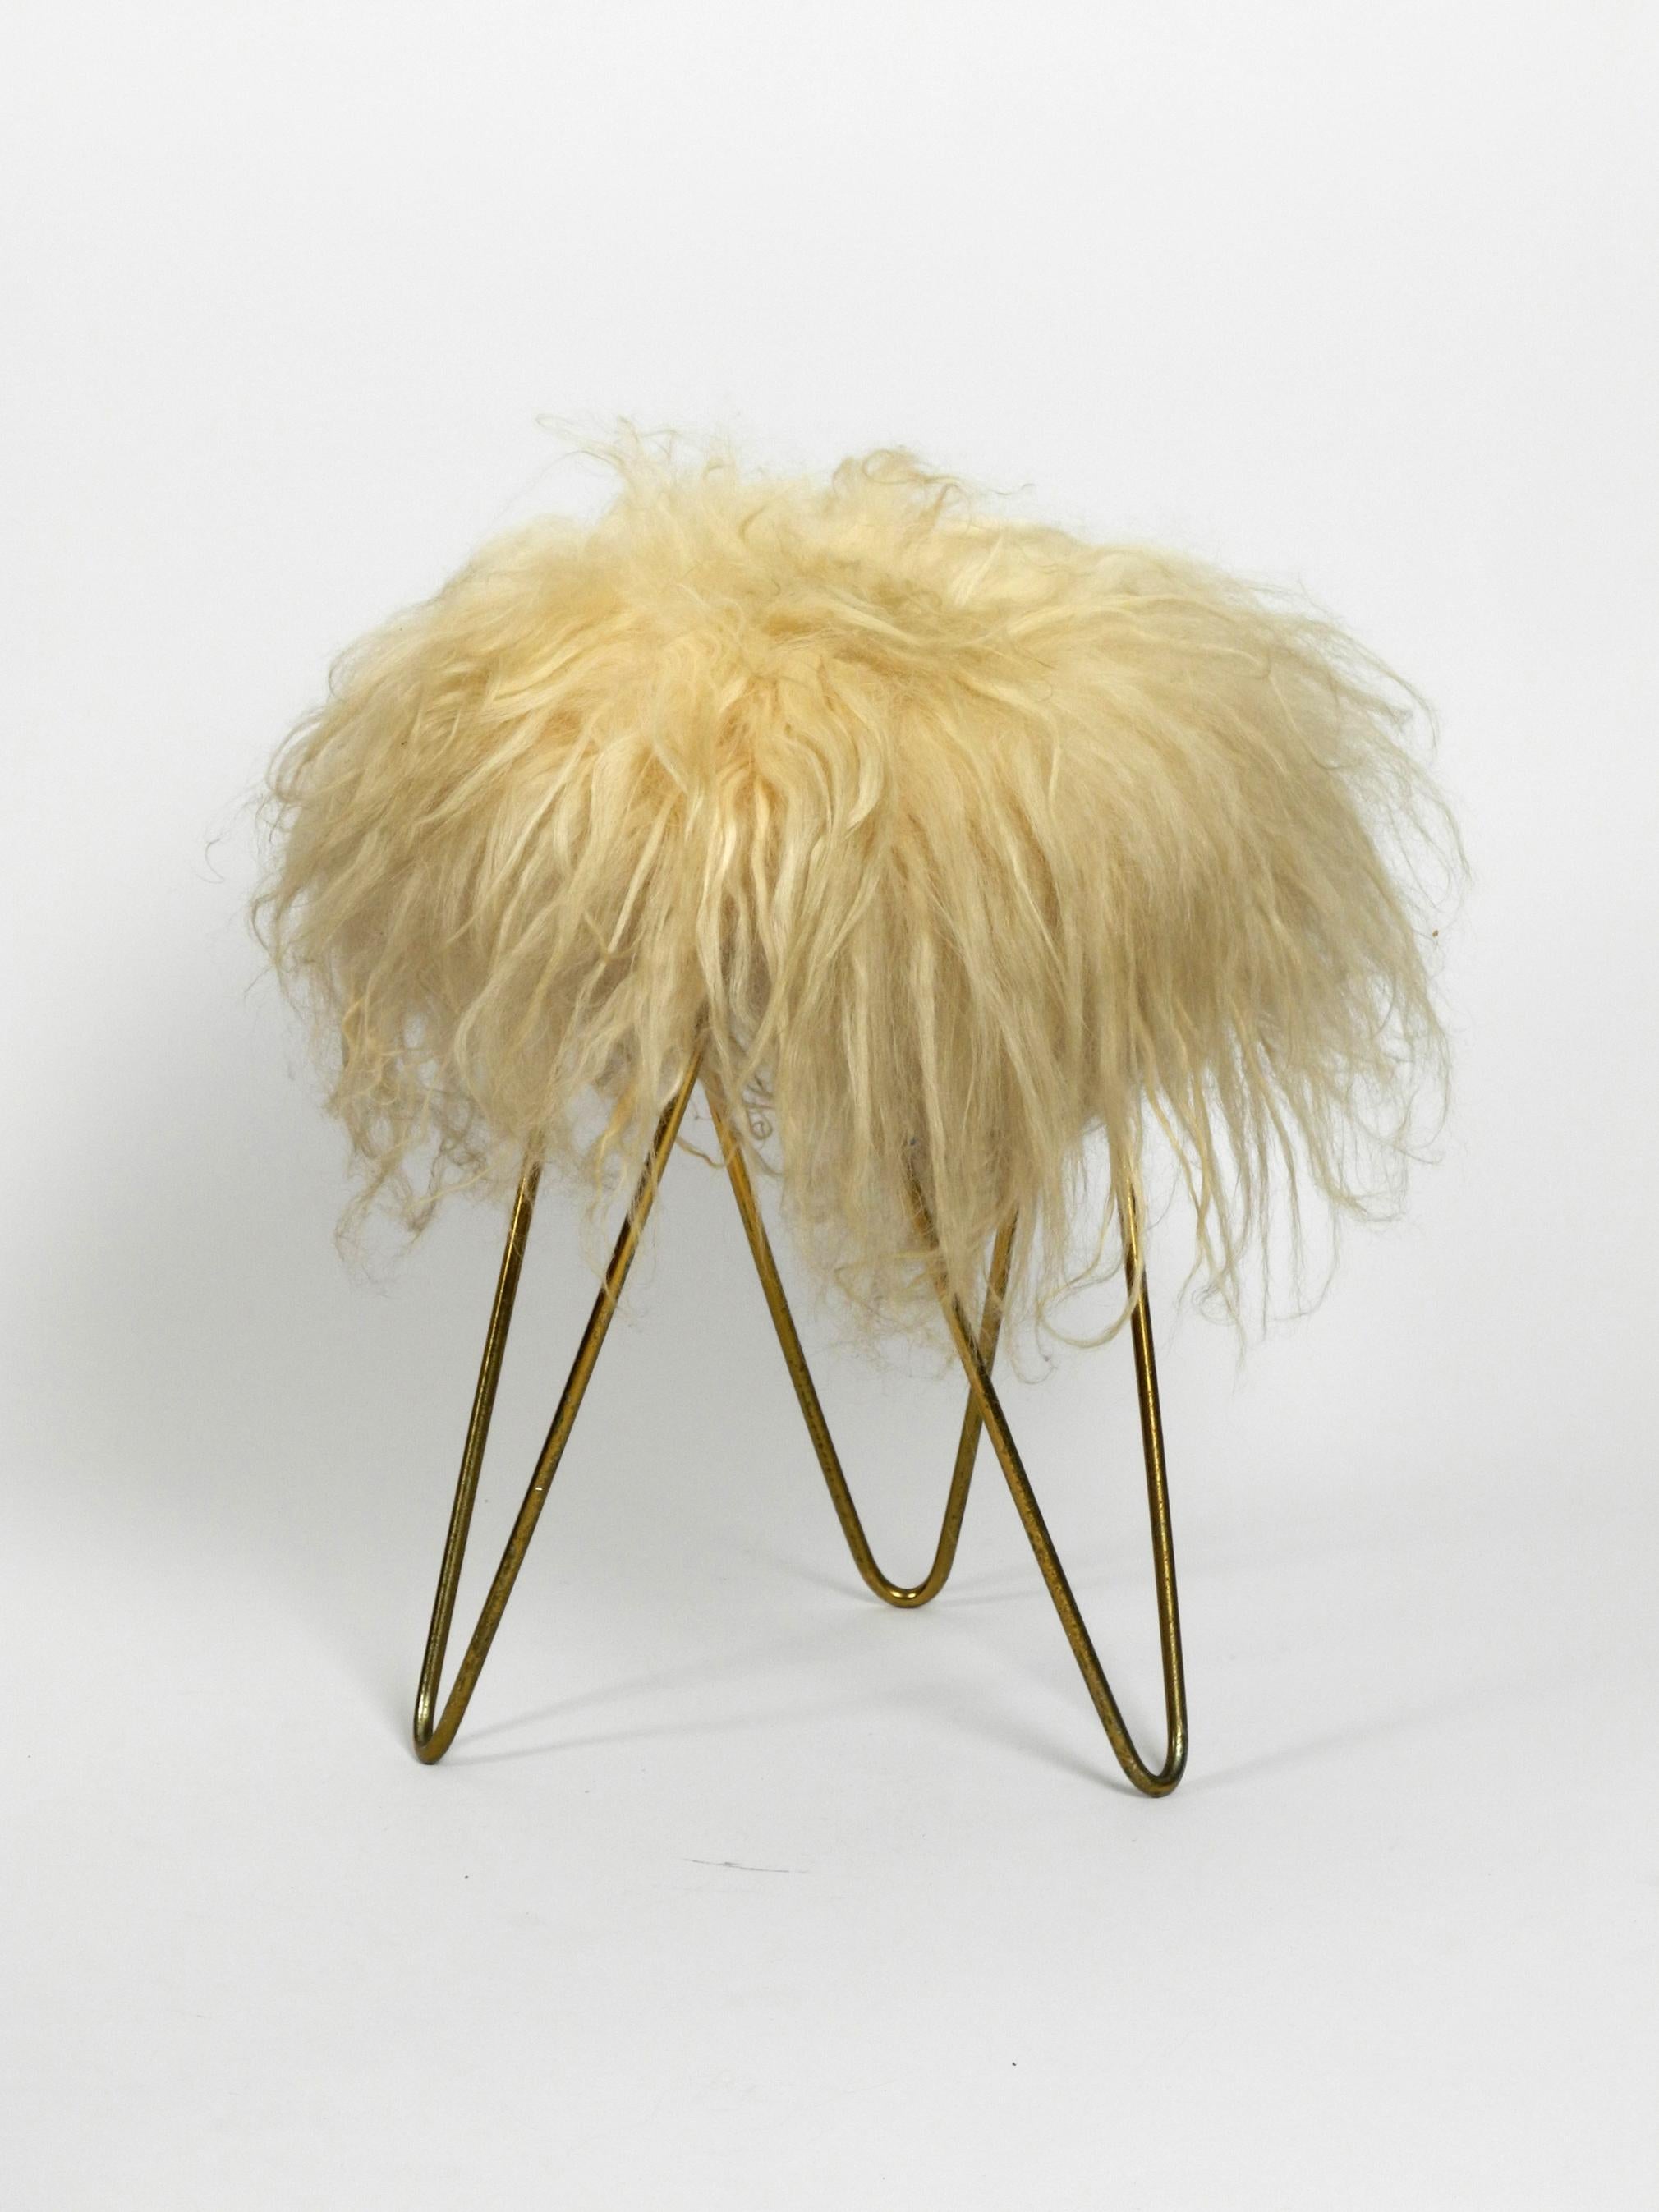 Beautiful midcentury white flokati stool with goat hair
cover and tripod hairpin feet.
The flokati cover is clean and not damaged, is firm and does not smell
Feet are made of brass anodized metal with nice patina.
No damages, not